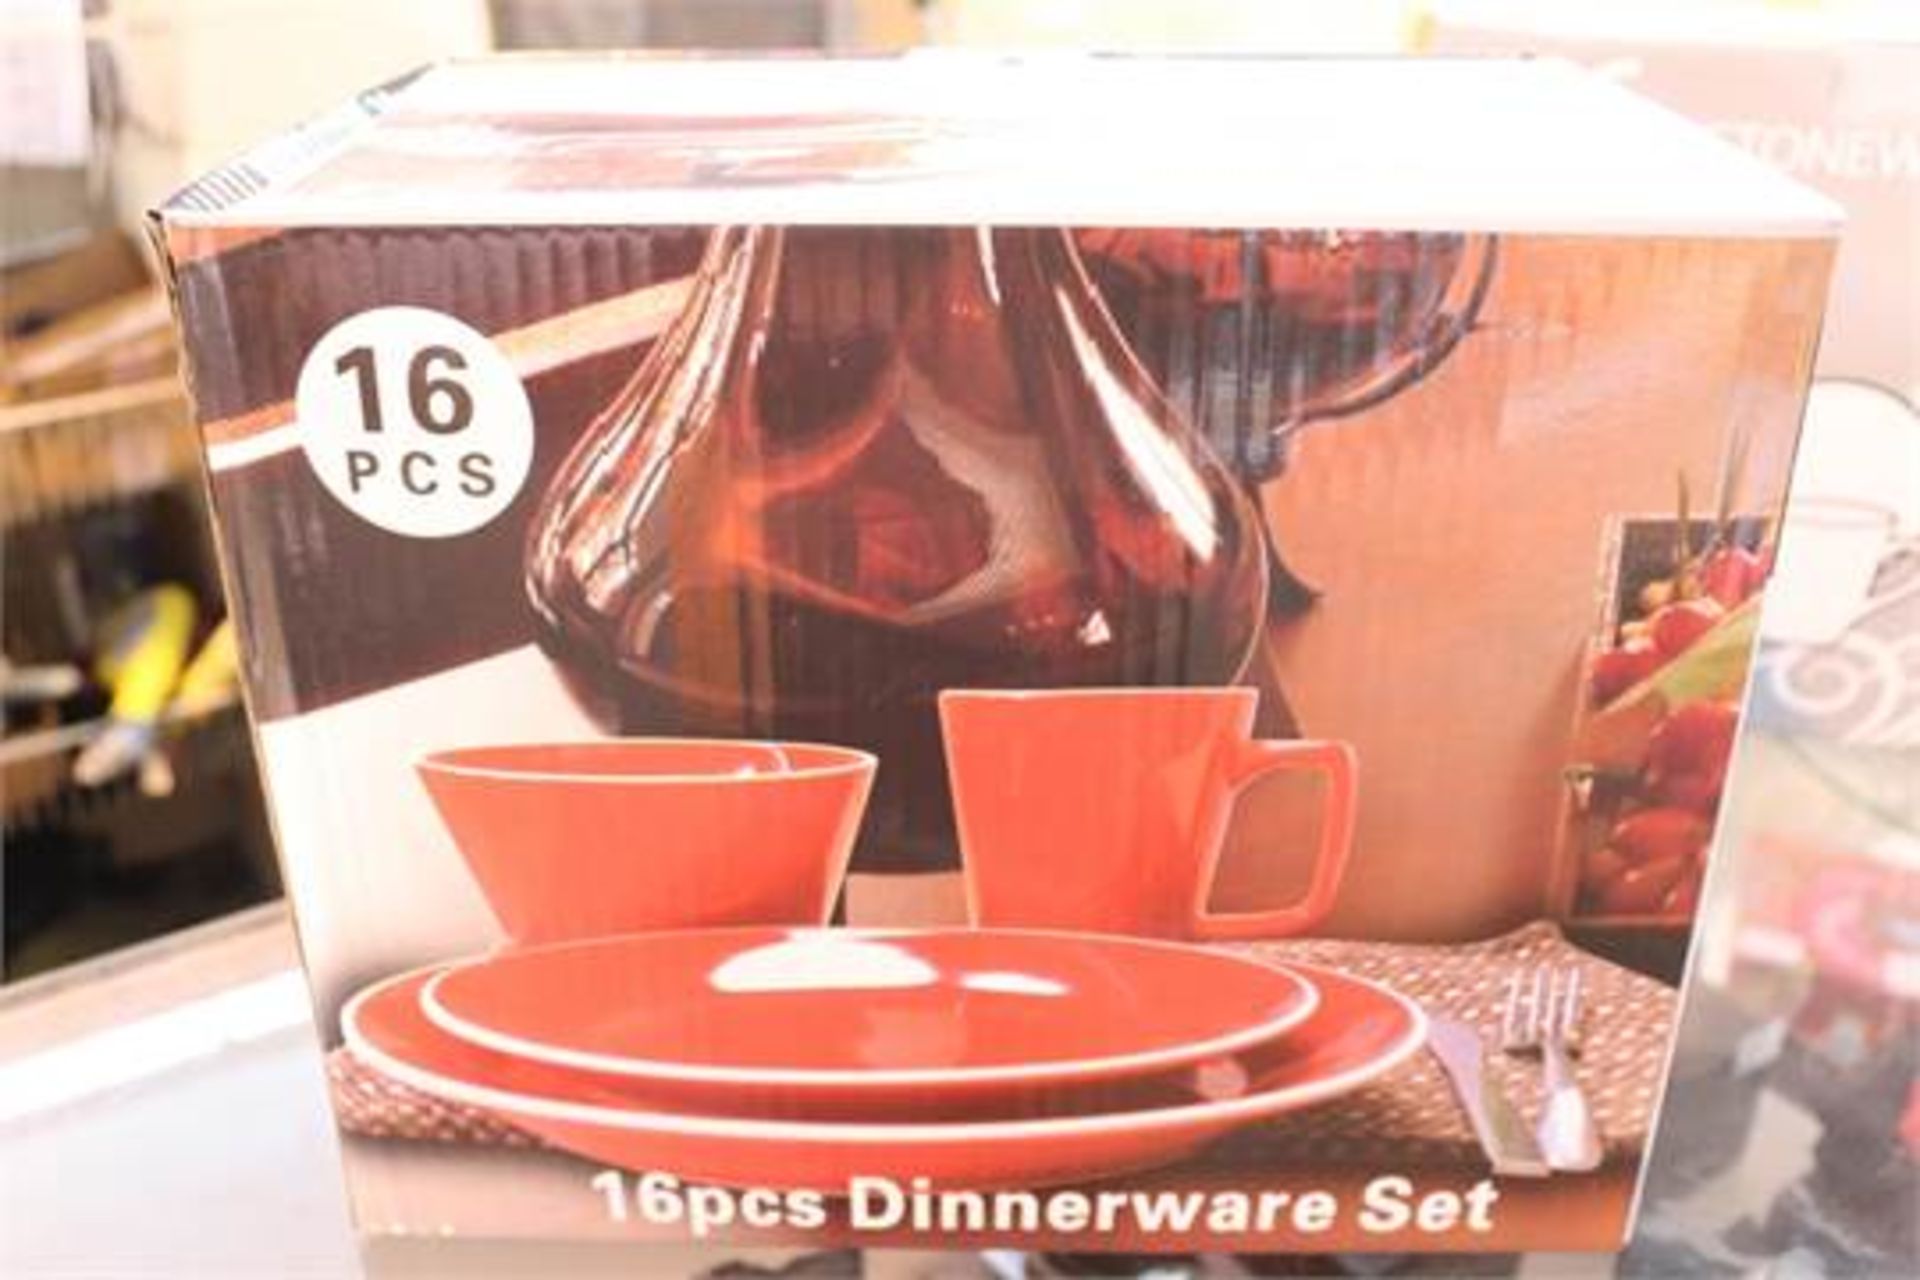 5X BOXED BRAND NEW 16 PIECE STONE WARE DINNER SETS IN RED (TLH-DINNER)